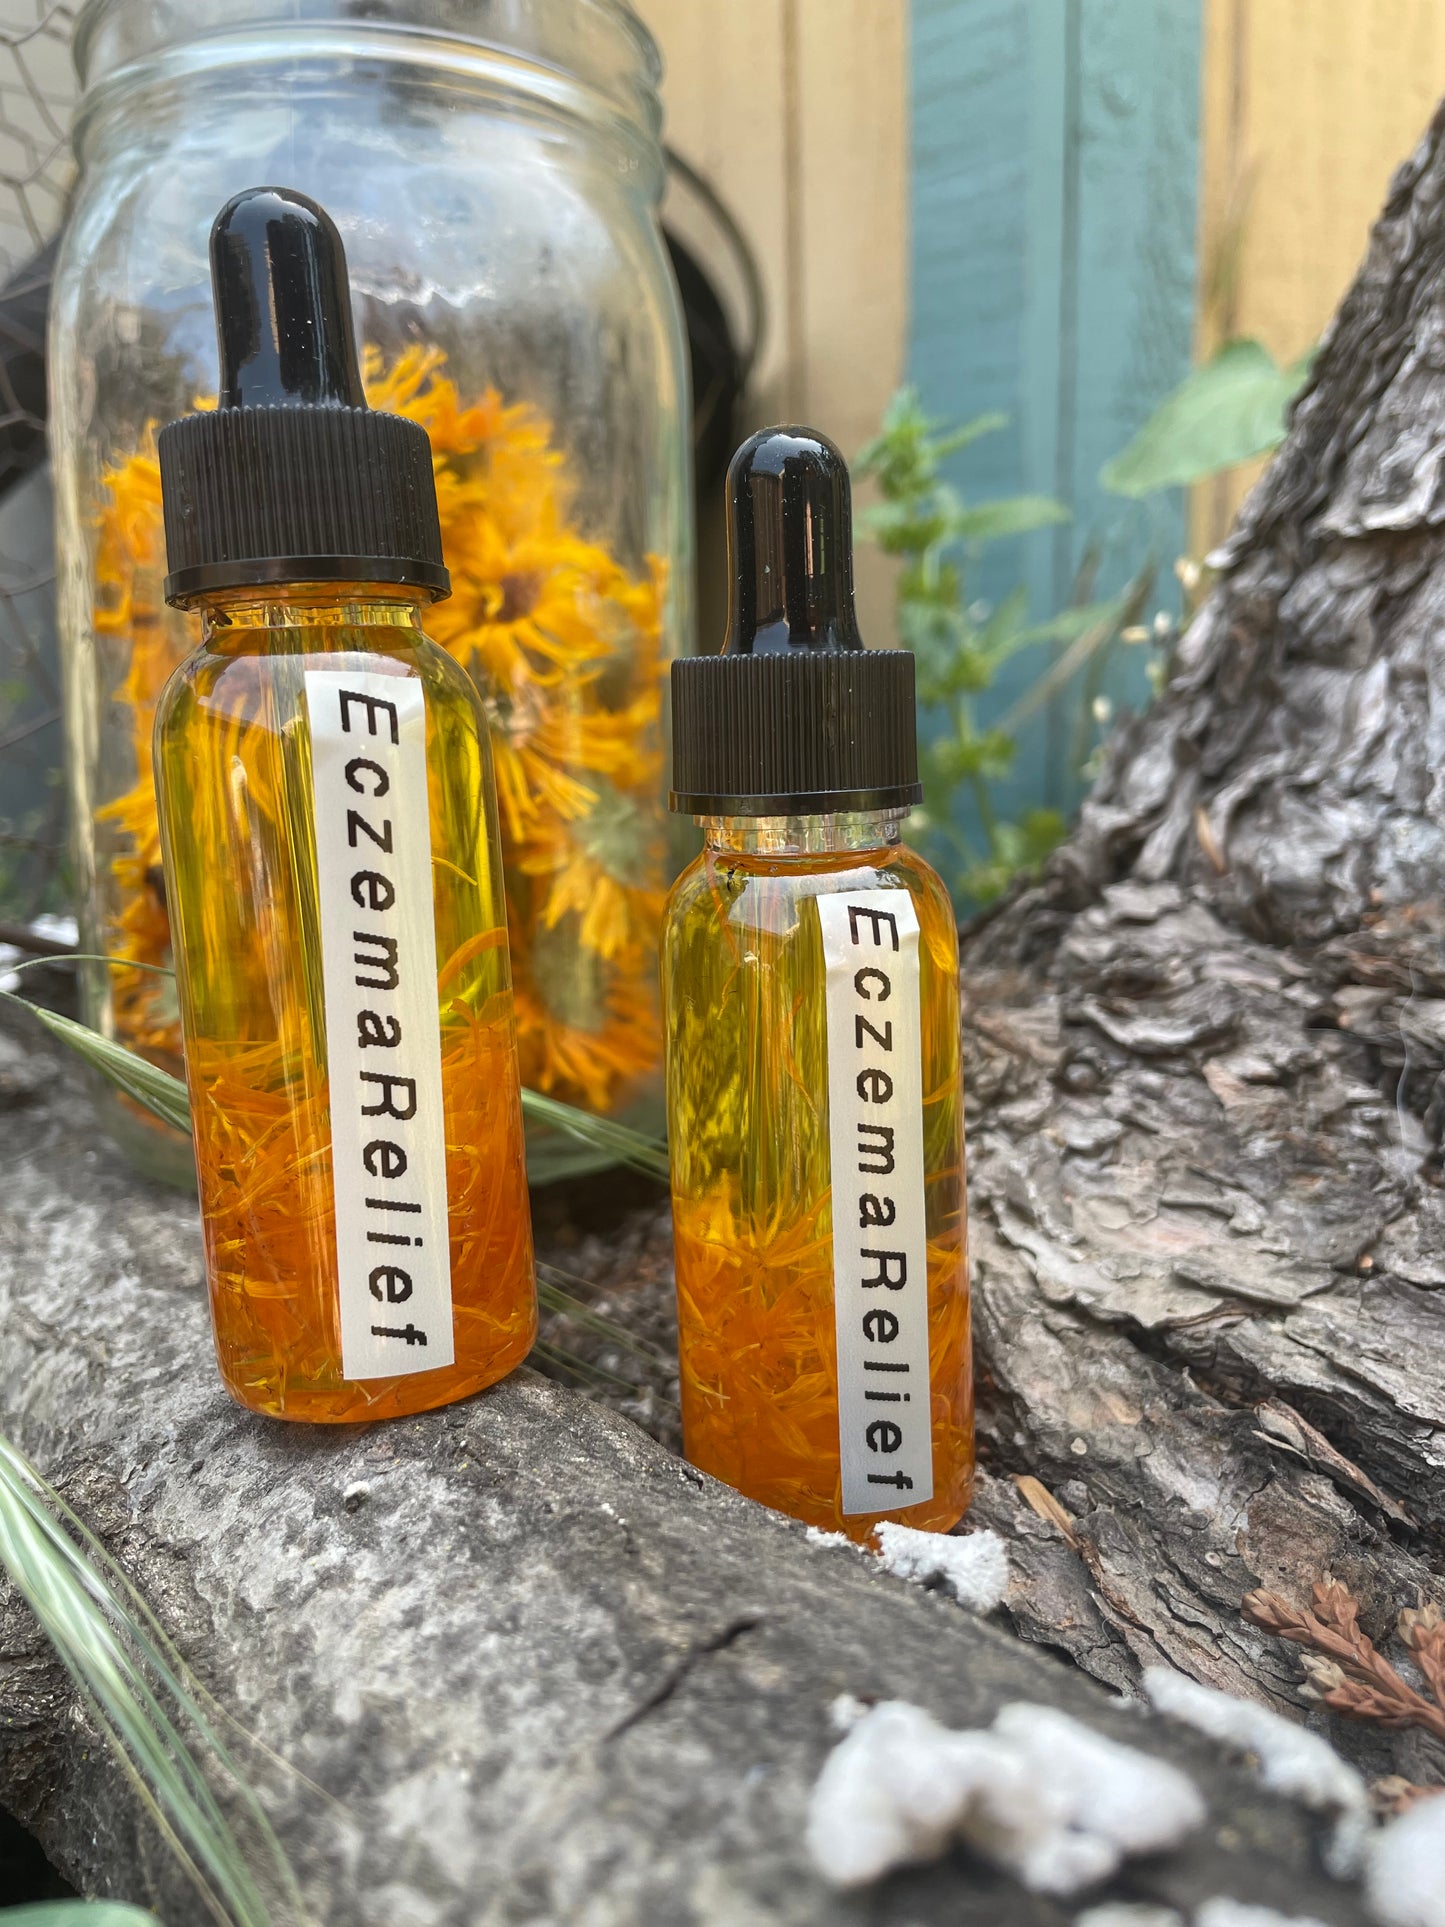 Dry Skin & Eczema Relief Oil- Our World-Famous Calendula Oil